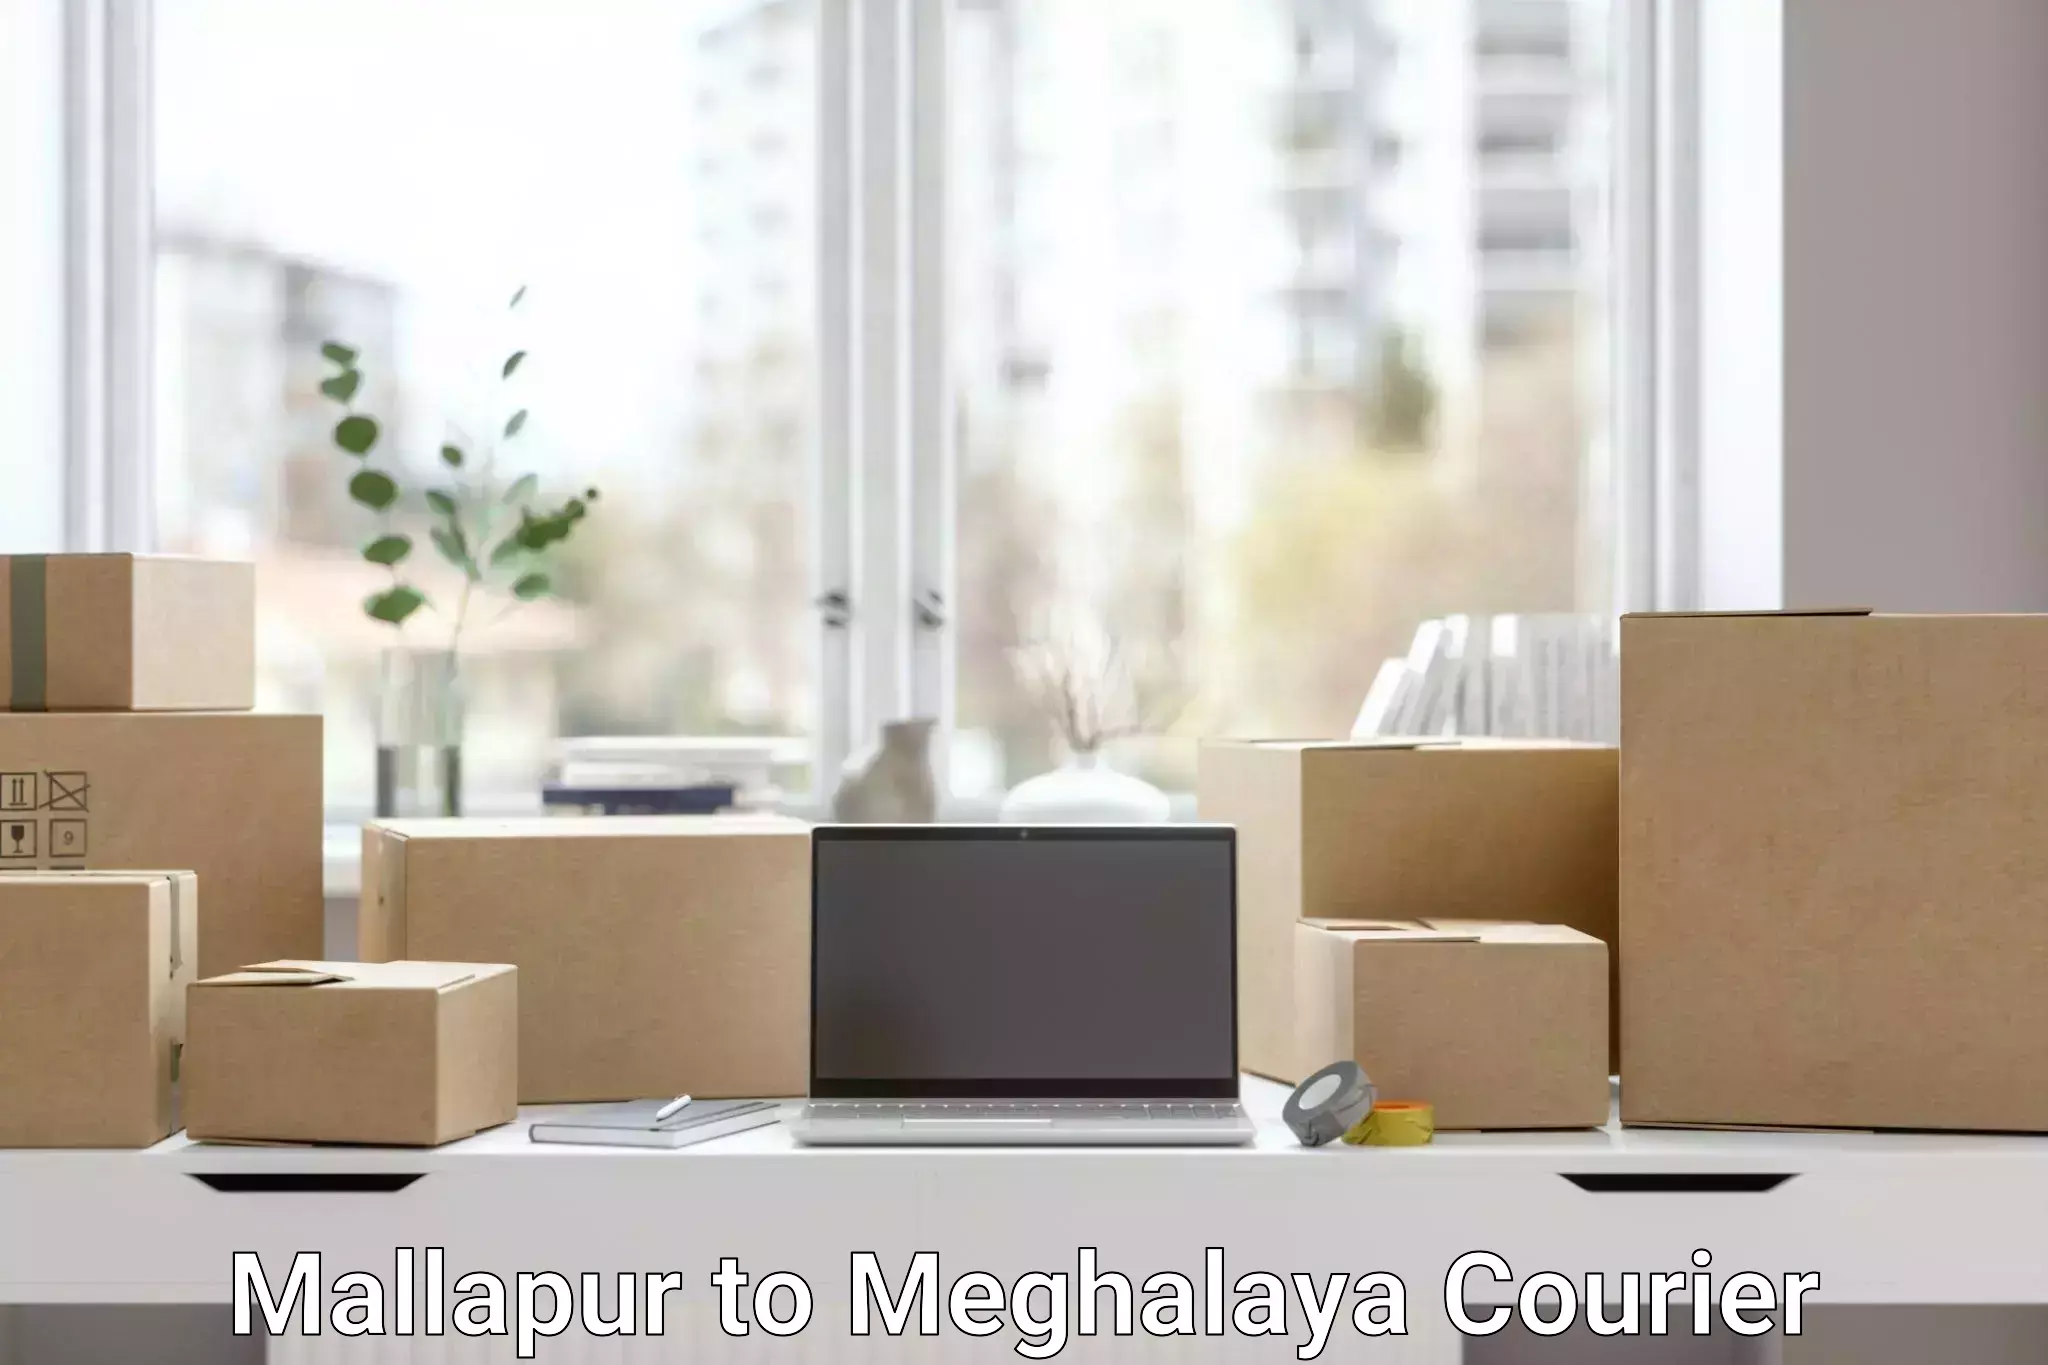 Customer-centric shipping in Mallapur to Umsaw